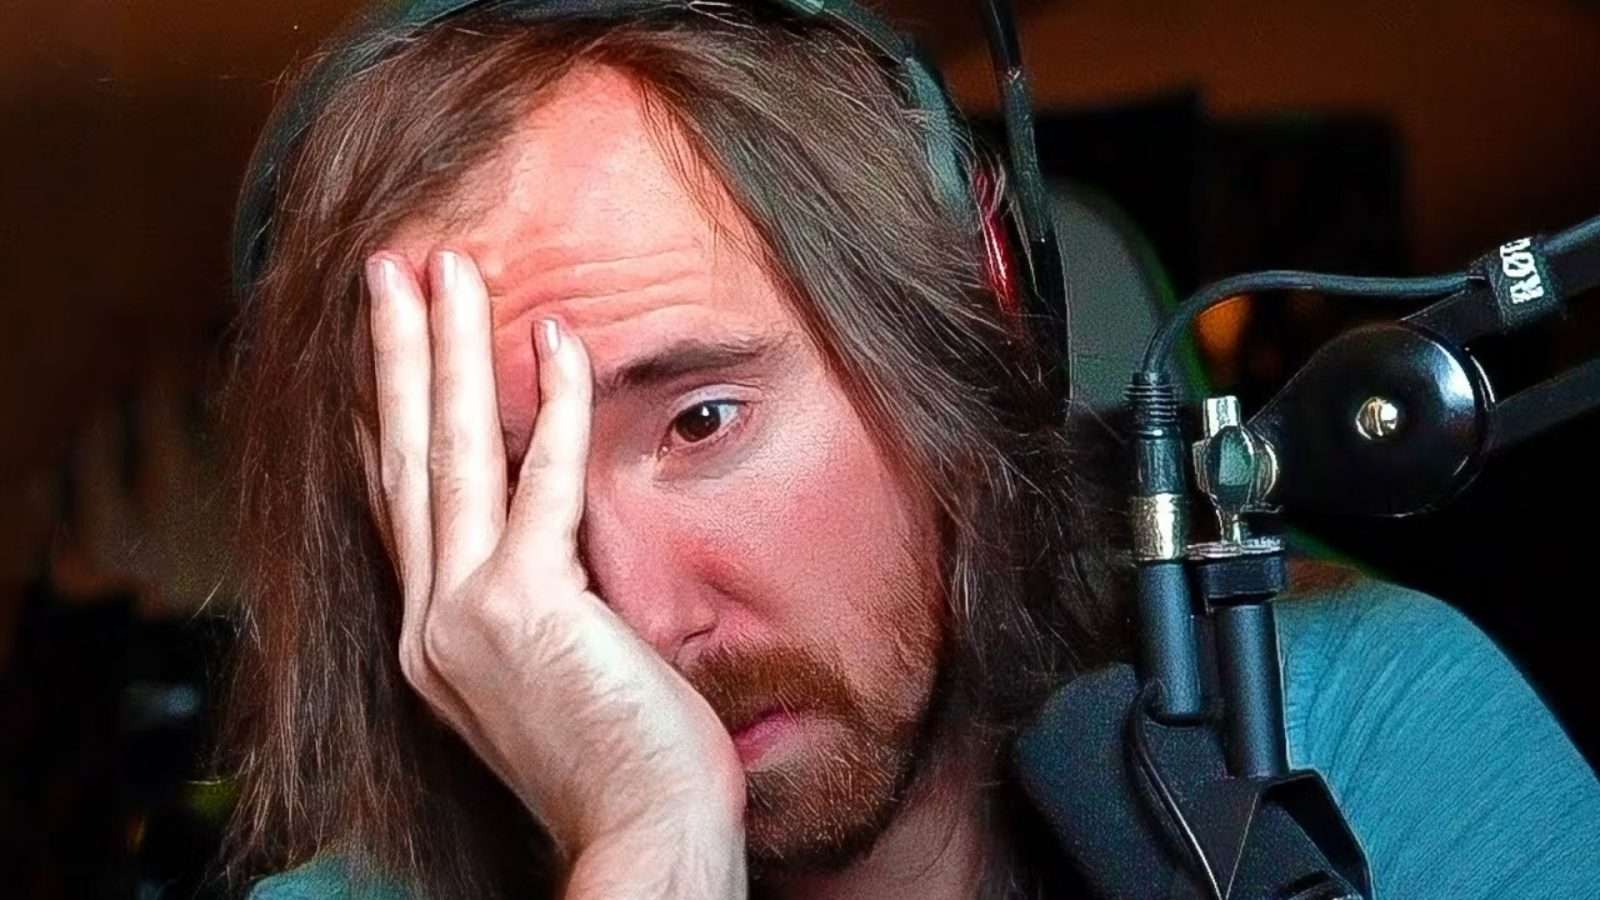 asmongold holding face